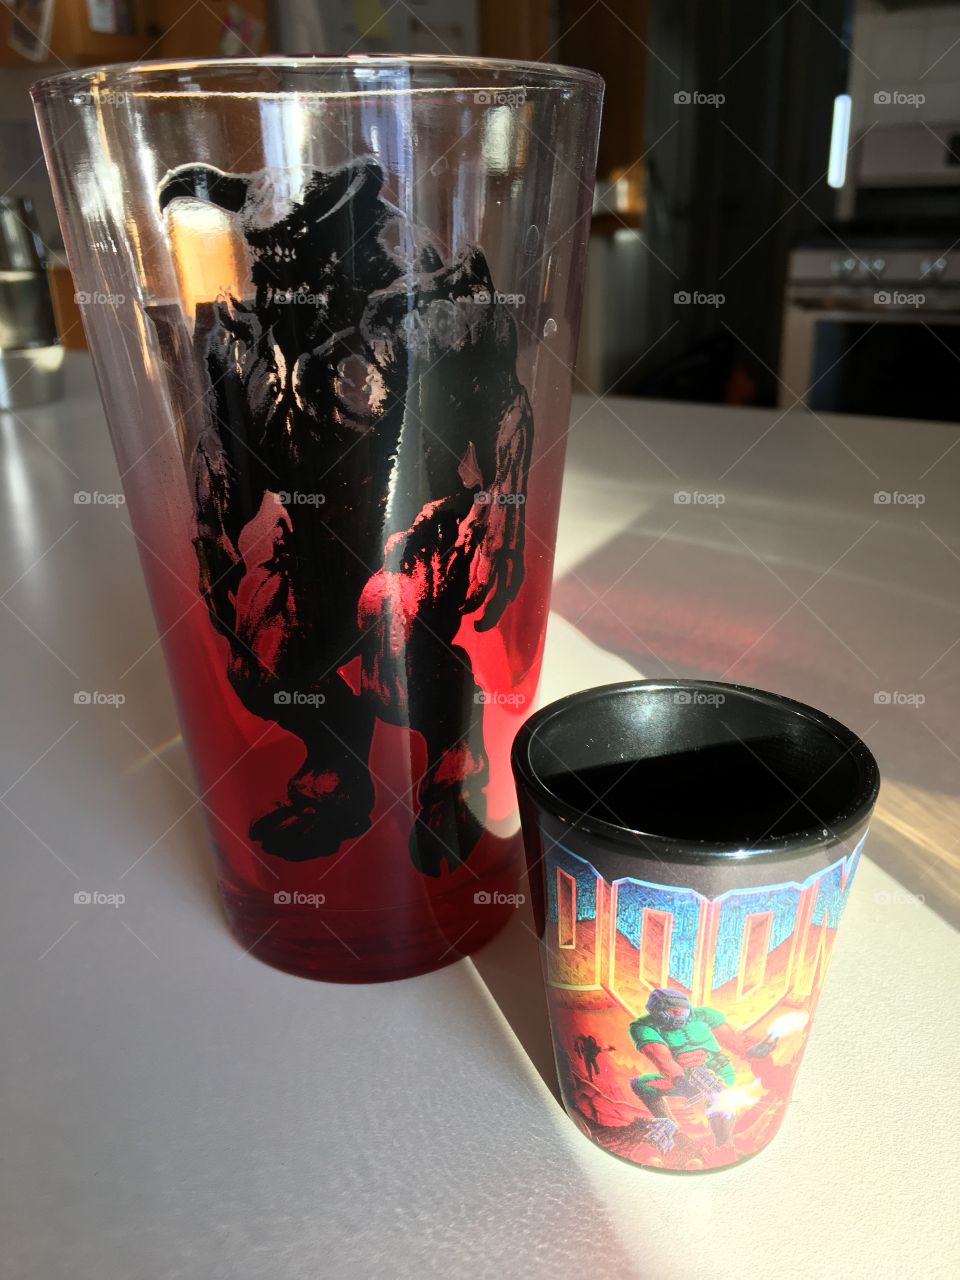 doom drinking equipment for my birthday - awesome